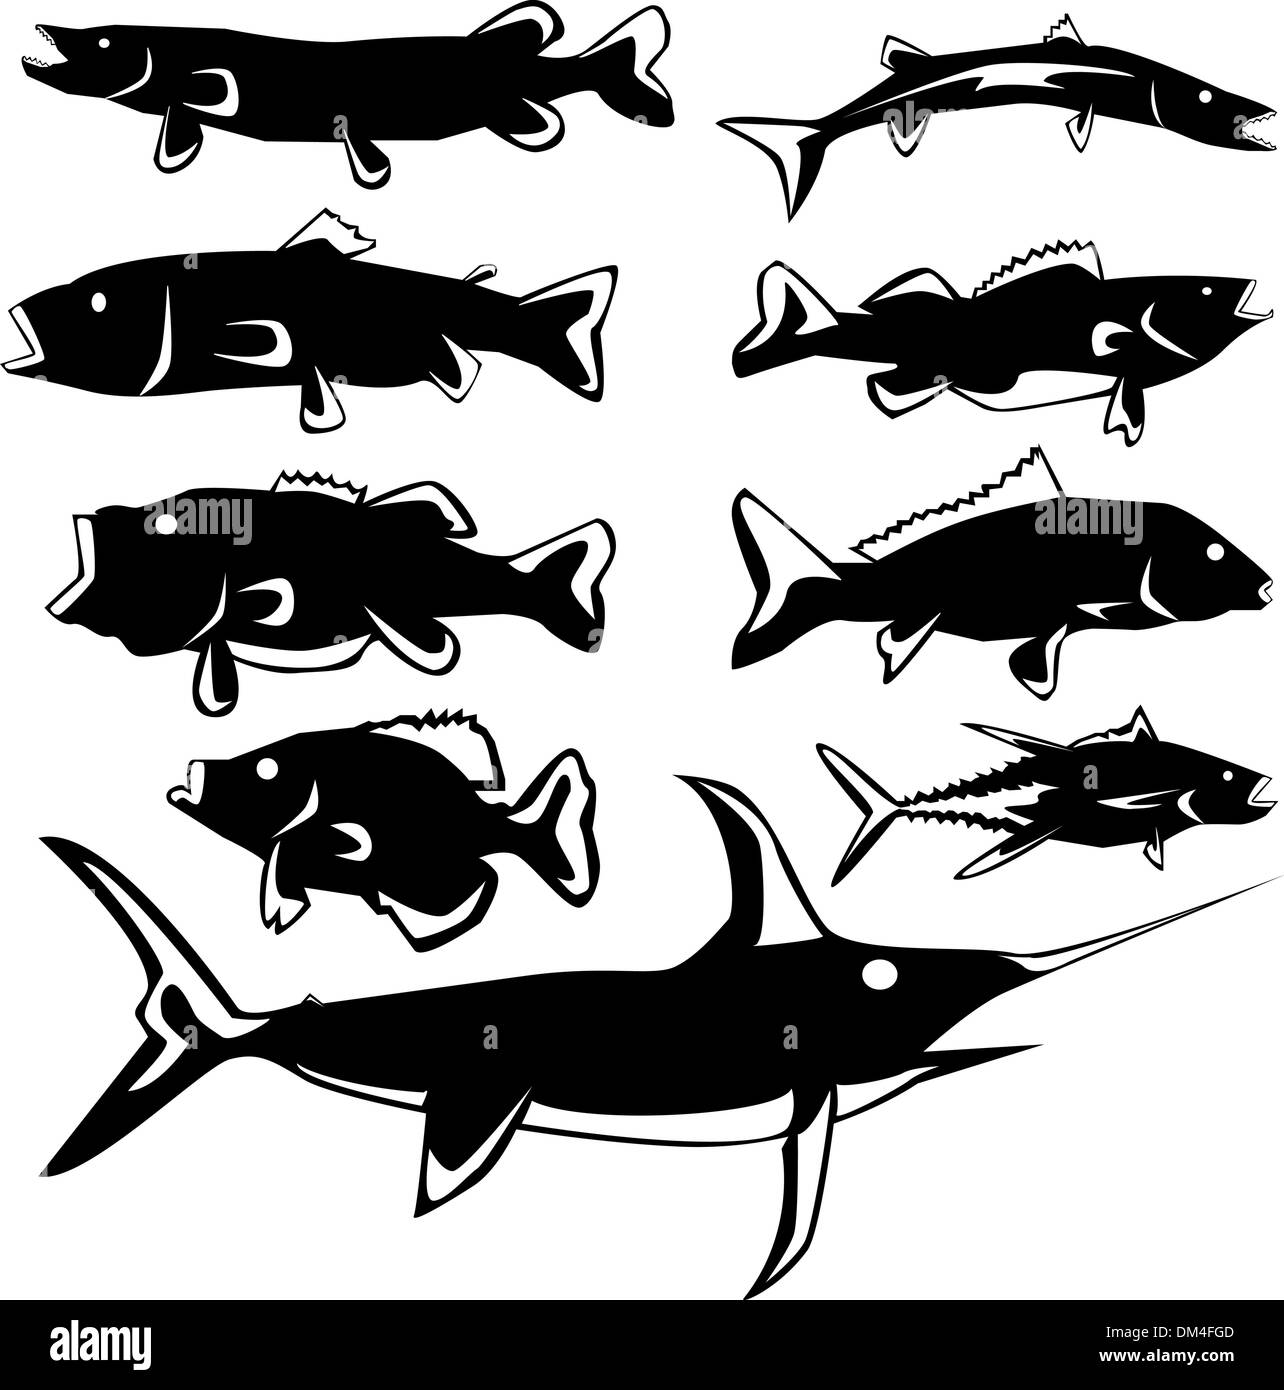 Game fish Black and White Stock Photos & Images - Alamy